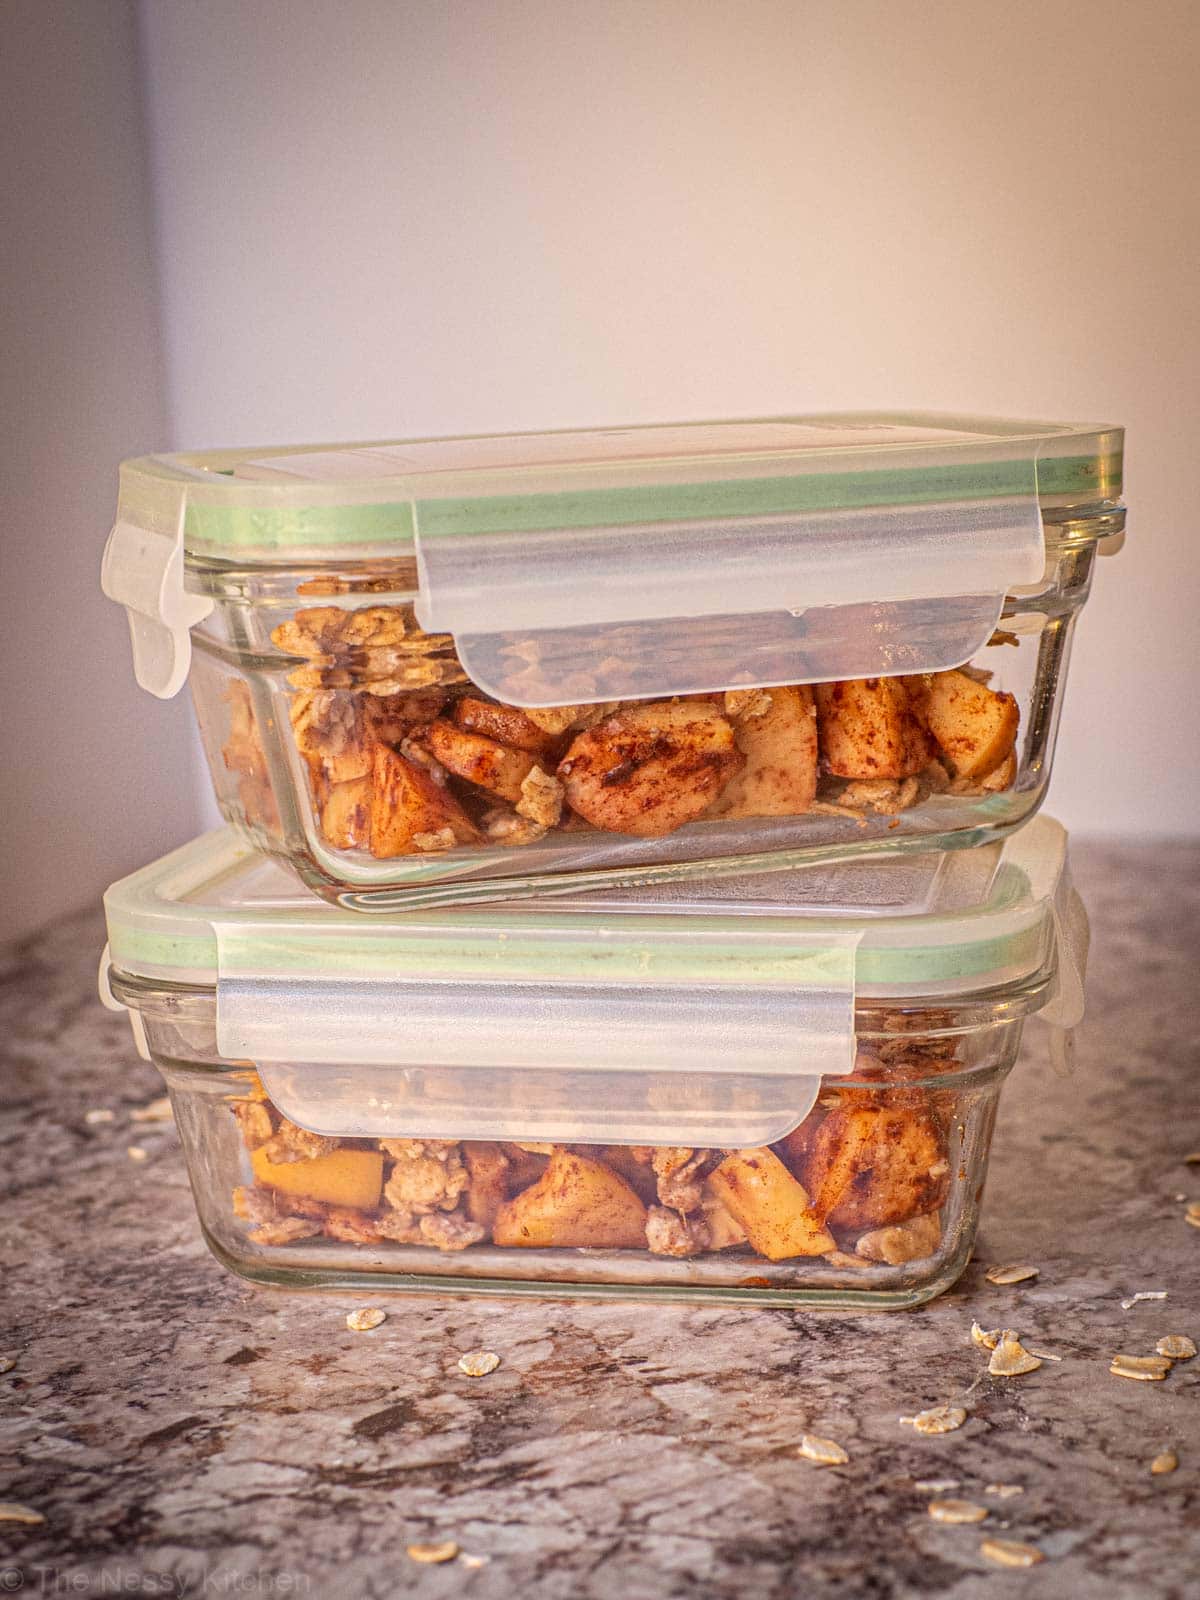 Apple crisp stored in two airtight glass containers.